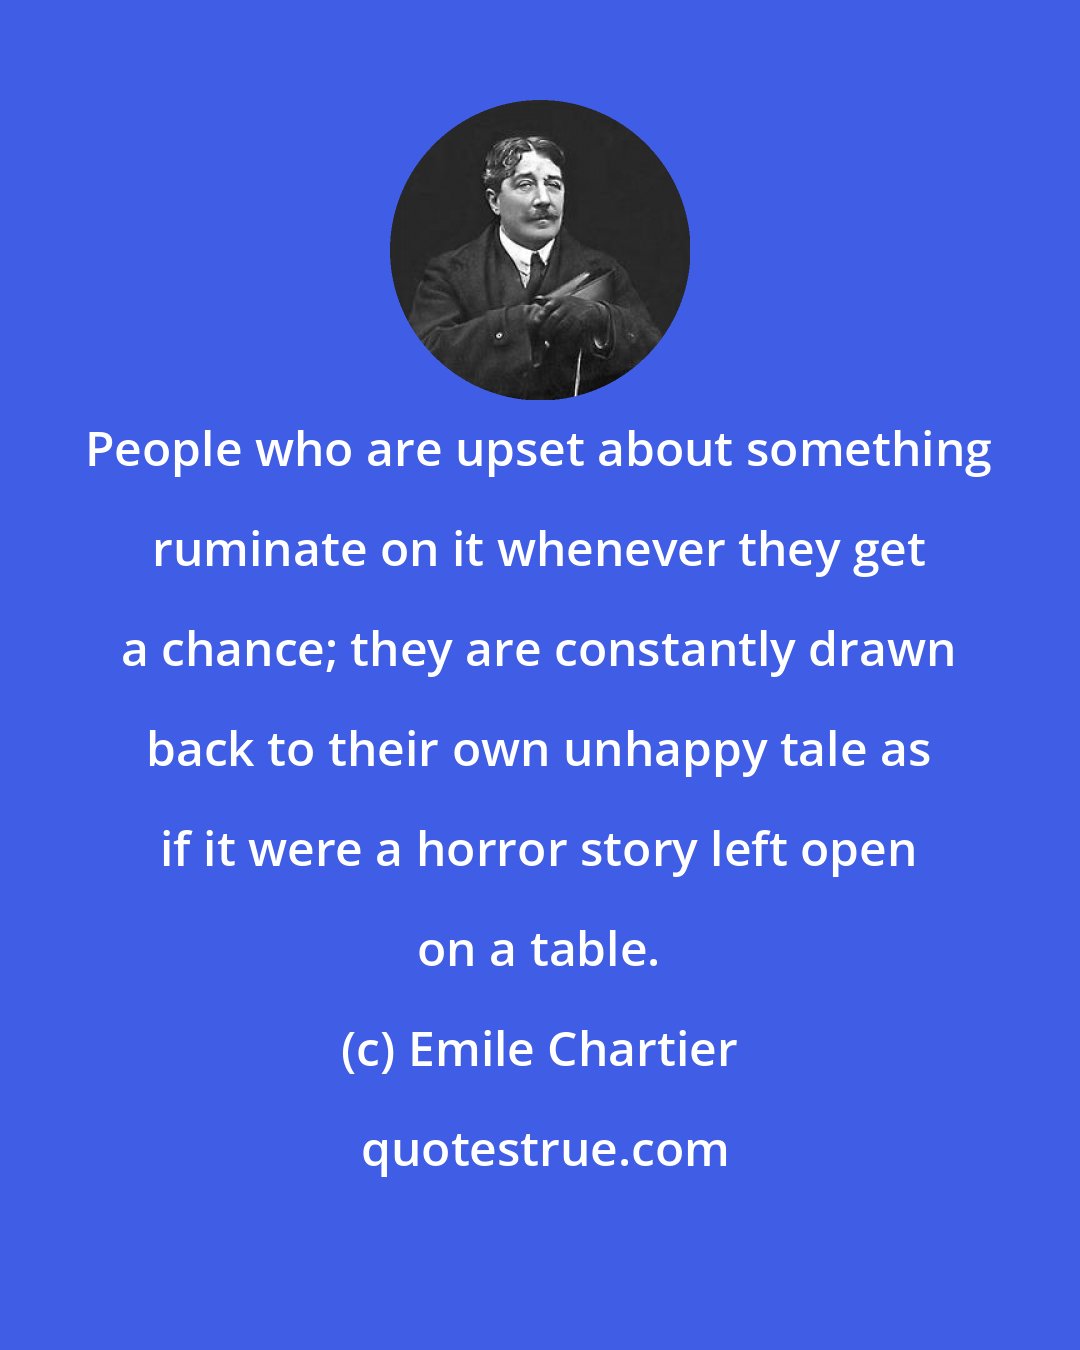 Emile Chartier: People who are upset about something ruminate on it whenever they get a chance; they are constantly drawn back to their own unhappy tale as if it were a horror story left open on a table.